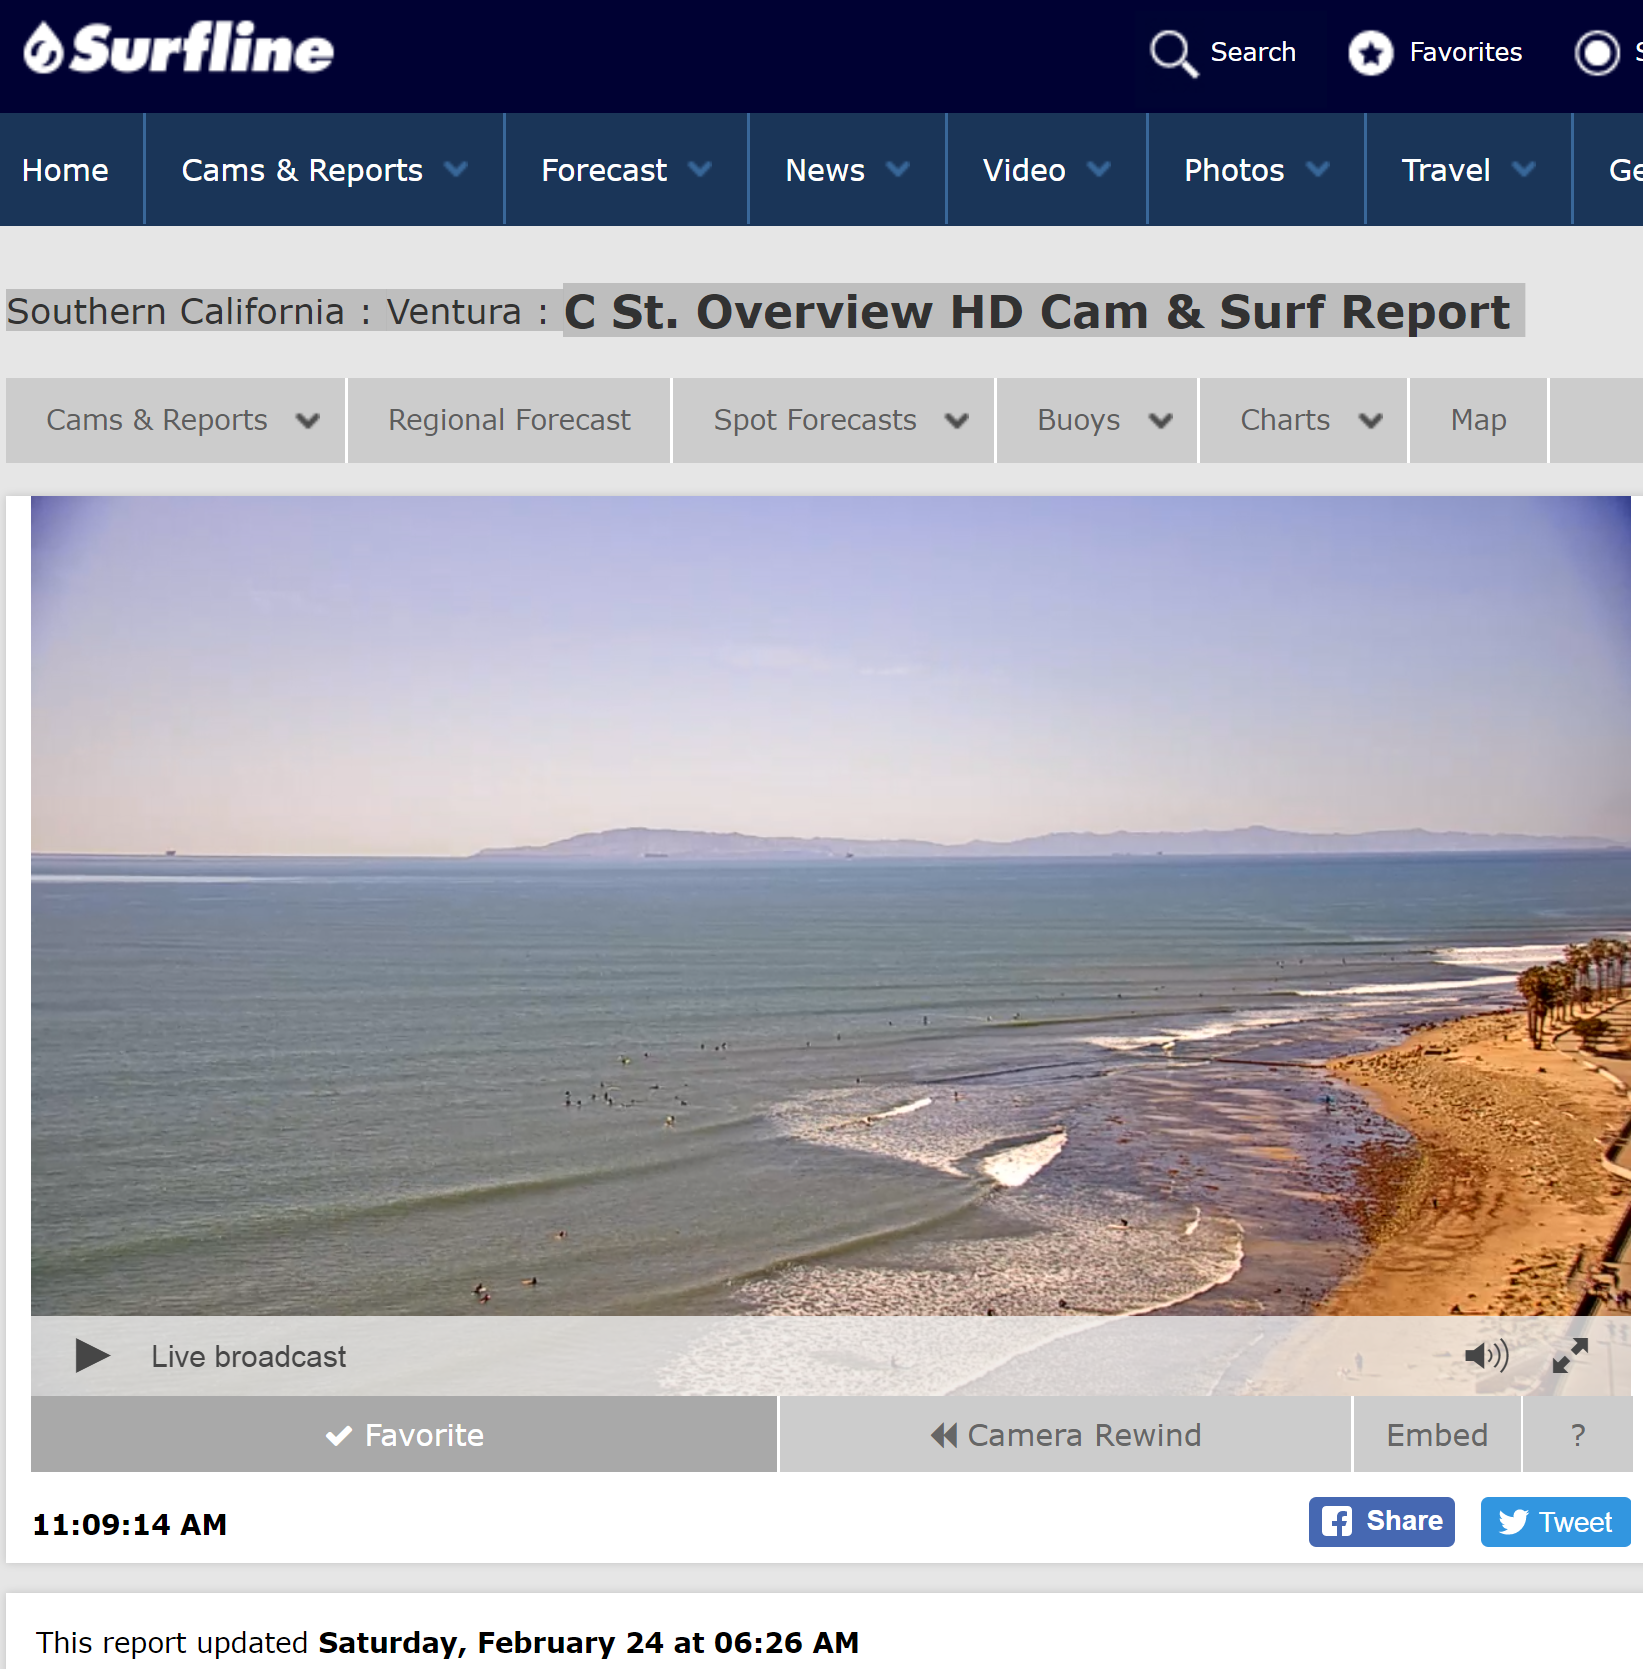 C St. Overview HD Cam & Surf Report